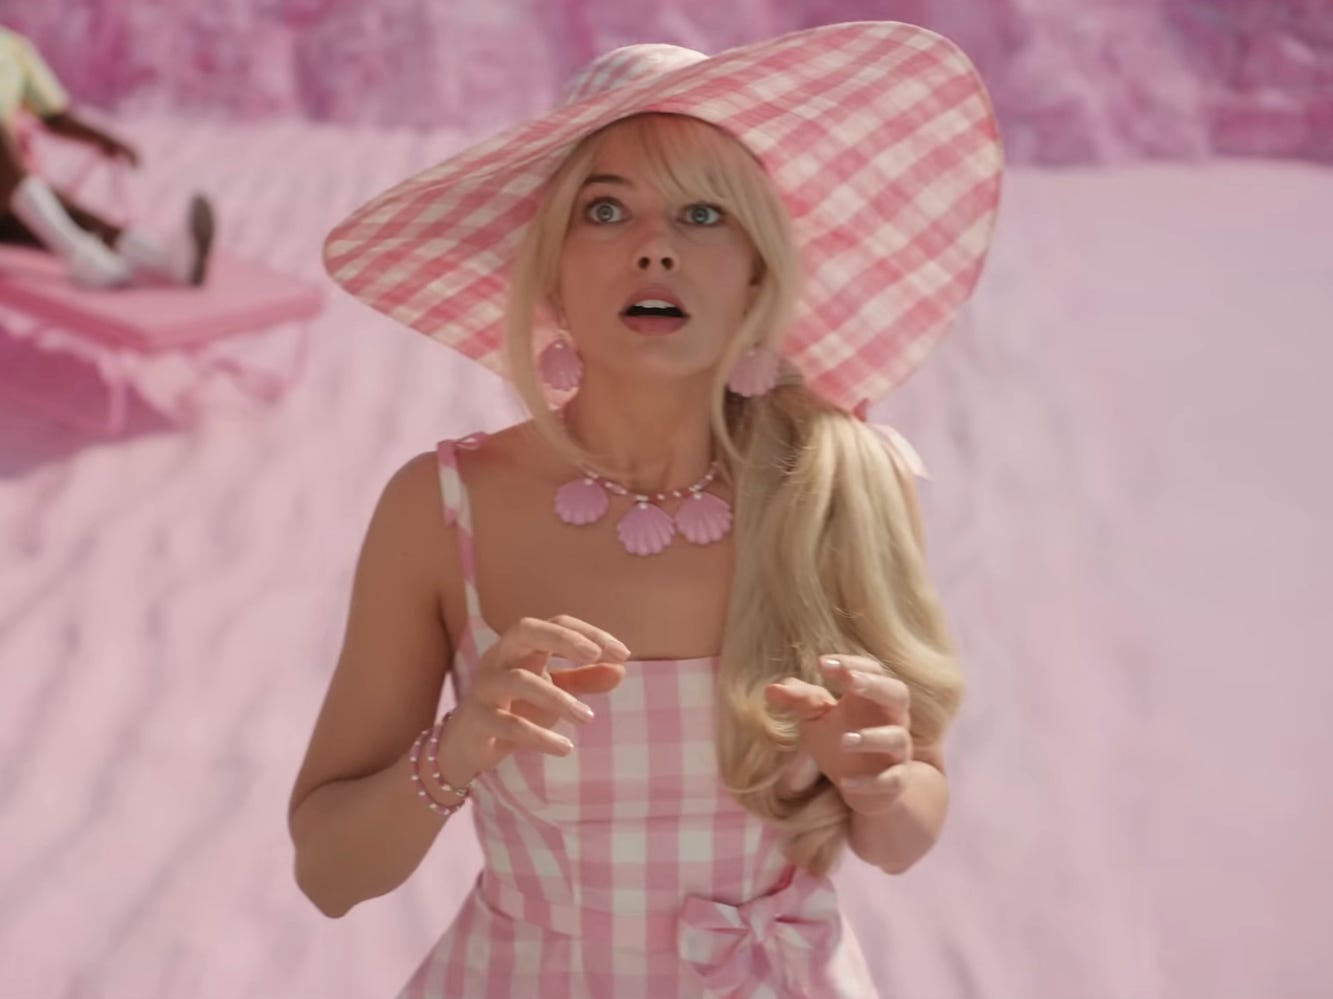 Margot Robbie in a scene from &#34;Barbie&#34; where Barbie is standing on a beach and looking up with a shocked expression on her face while wearing a pink and white plaid dress with a large sunhat.